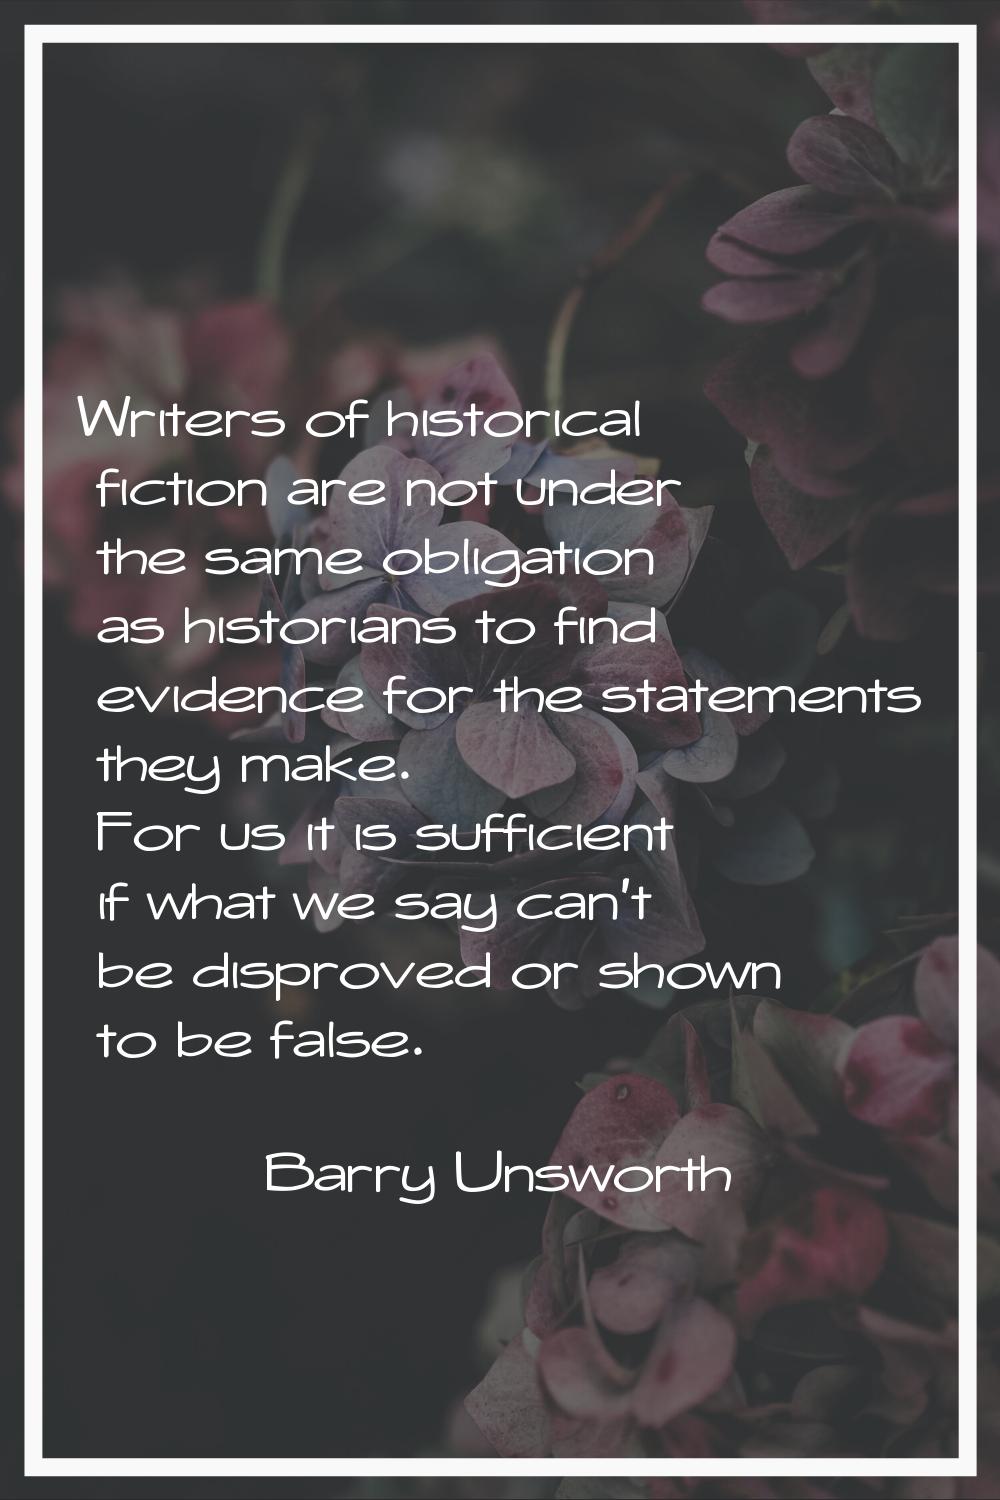 Writers of historical fiction are not under the same obligation as historians to find evidence for 